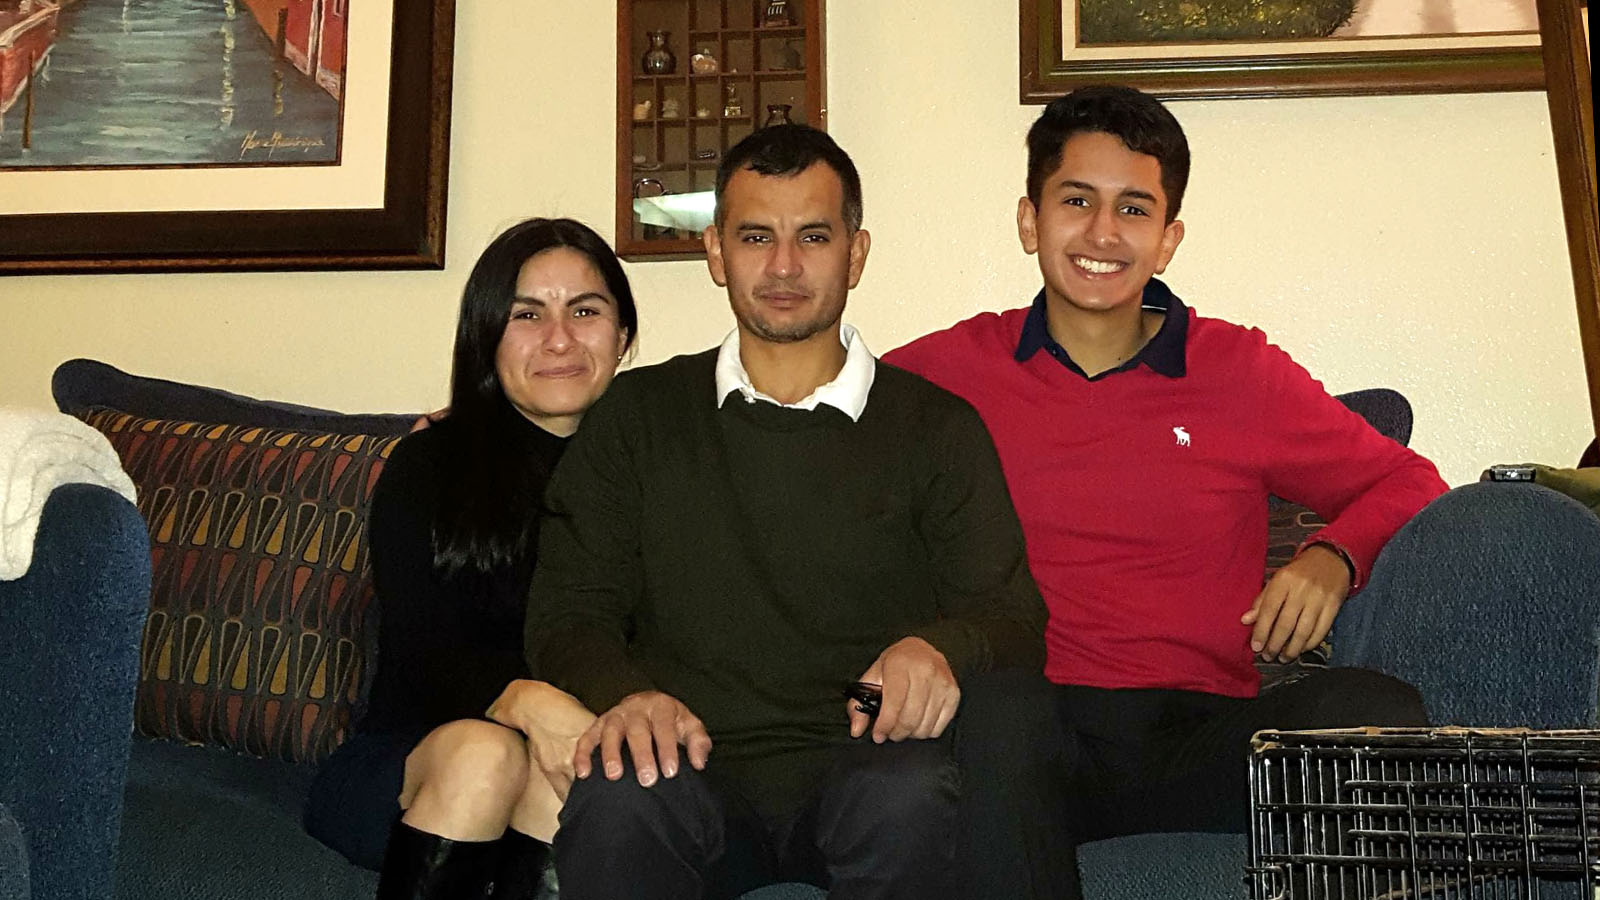 PHOTO: Eliott Flores with his father, Noel Flores, and his mother, Mayra Medrano over the holidays last year.